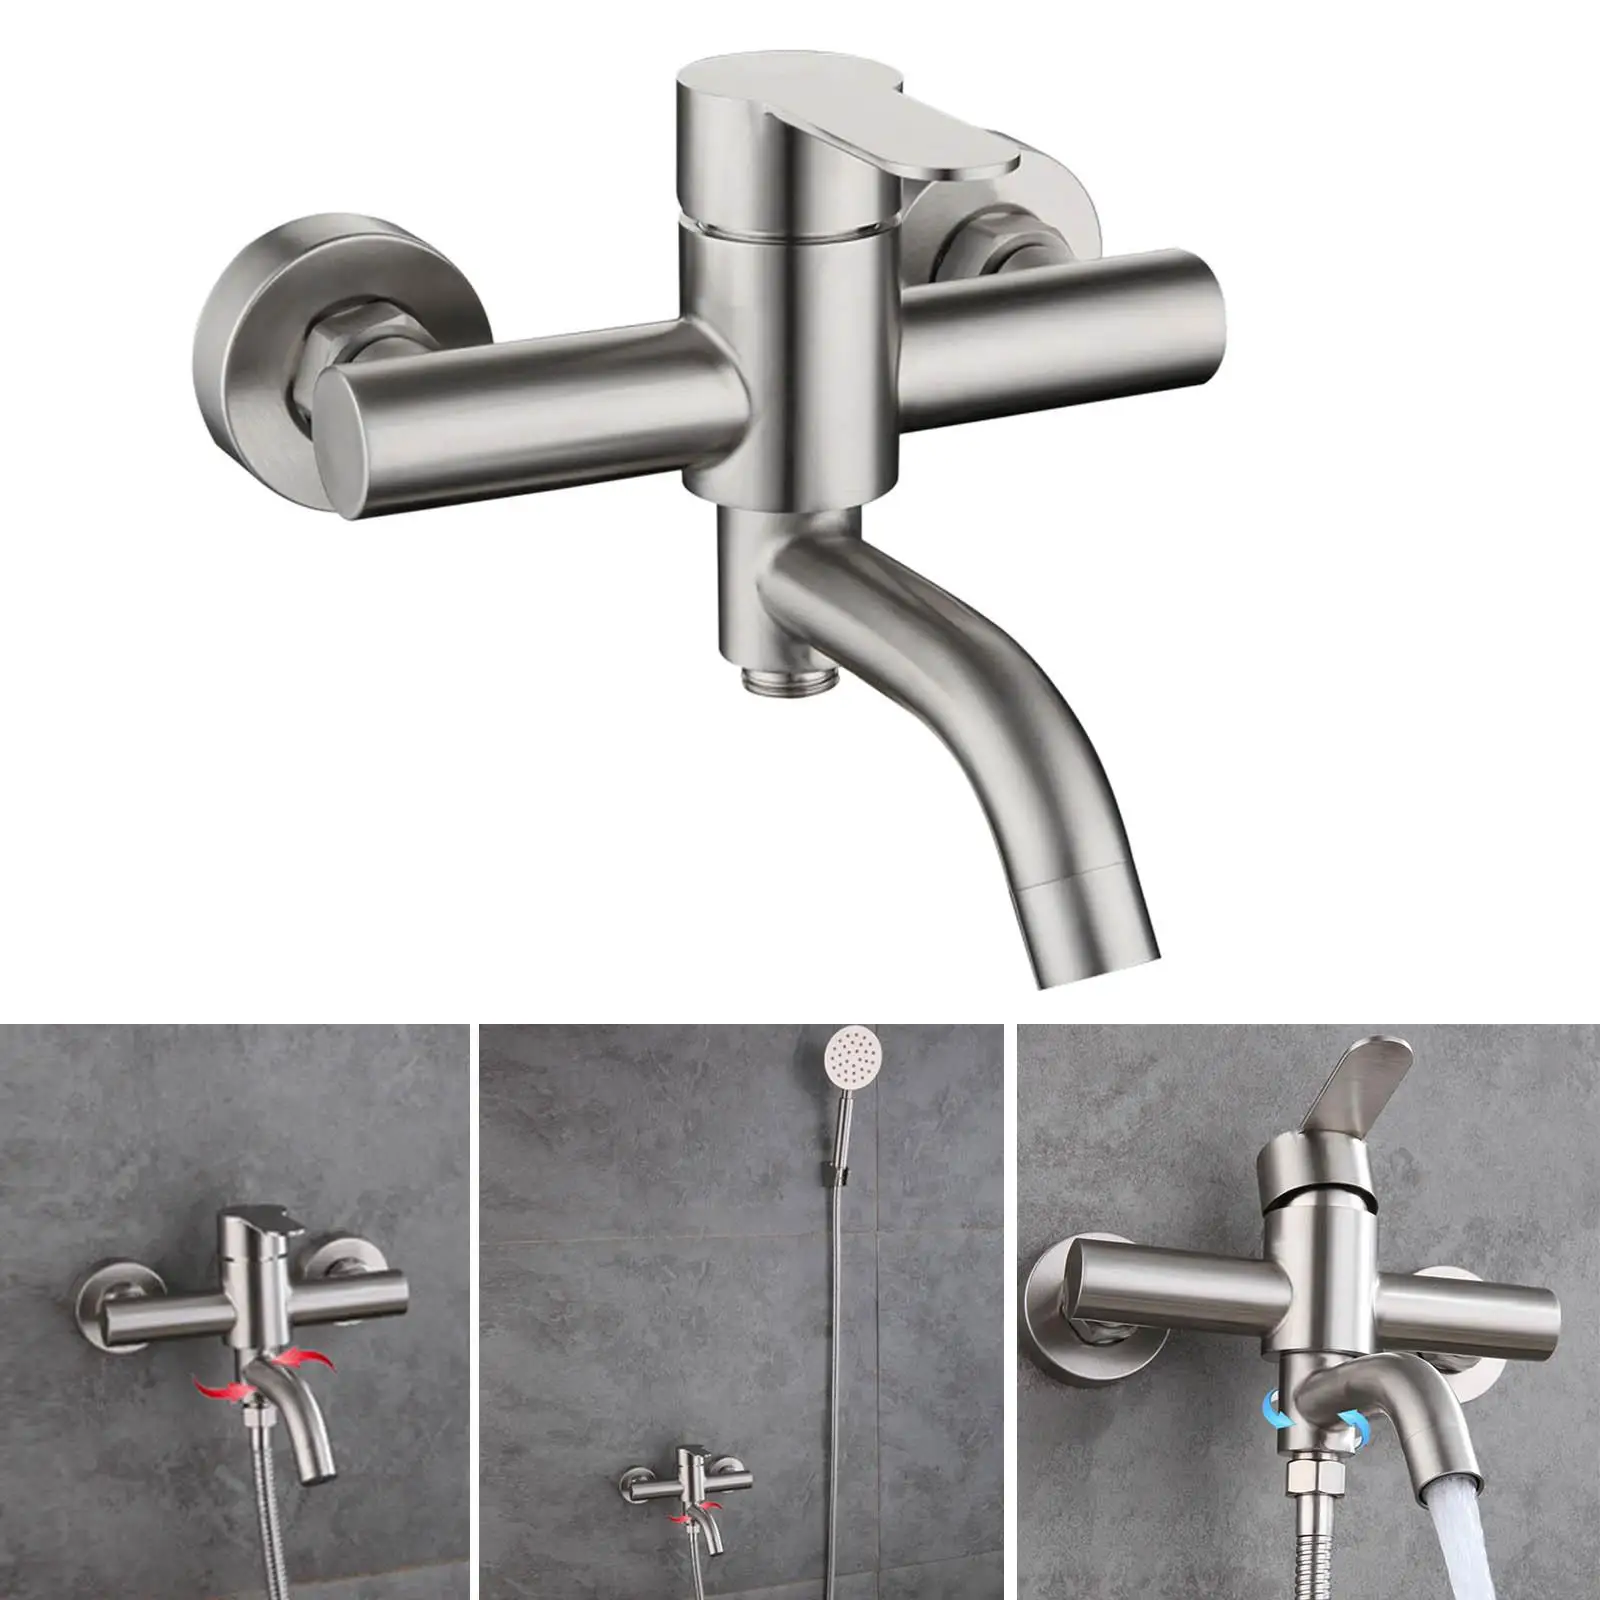 Stainless Steel Shower Mixer Faucet Hole Spacing 150mm Bathroom System